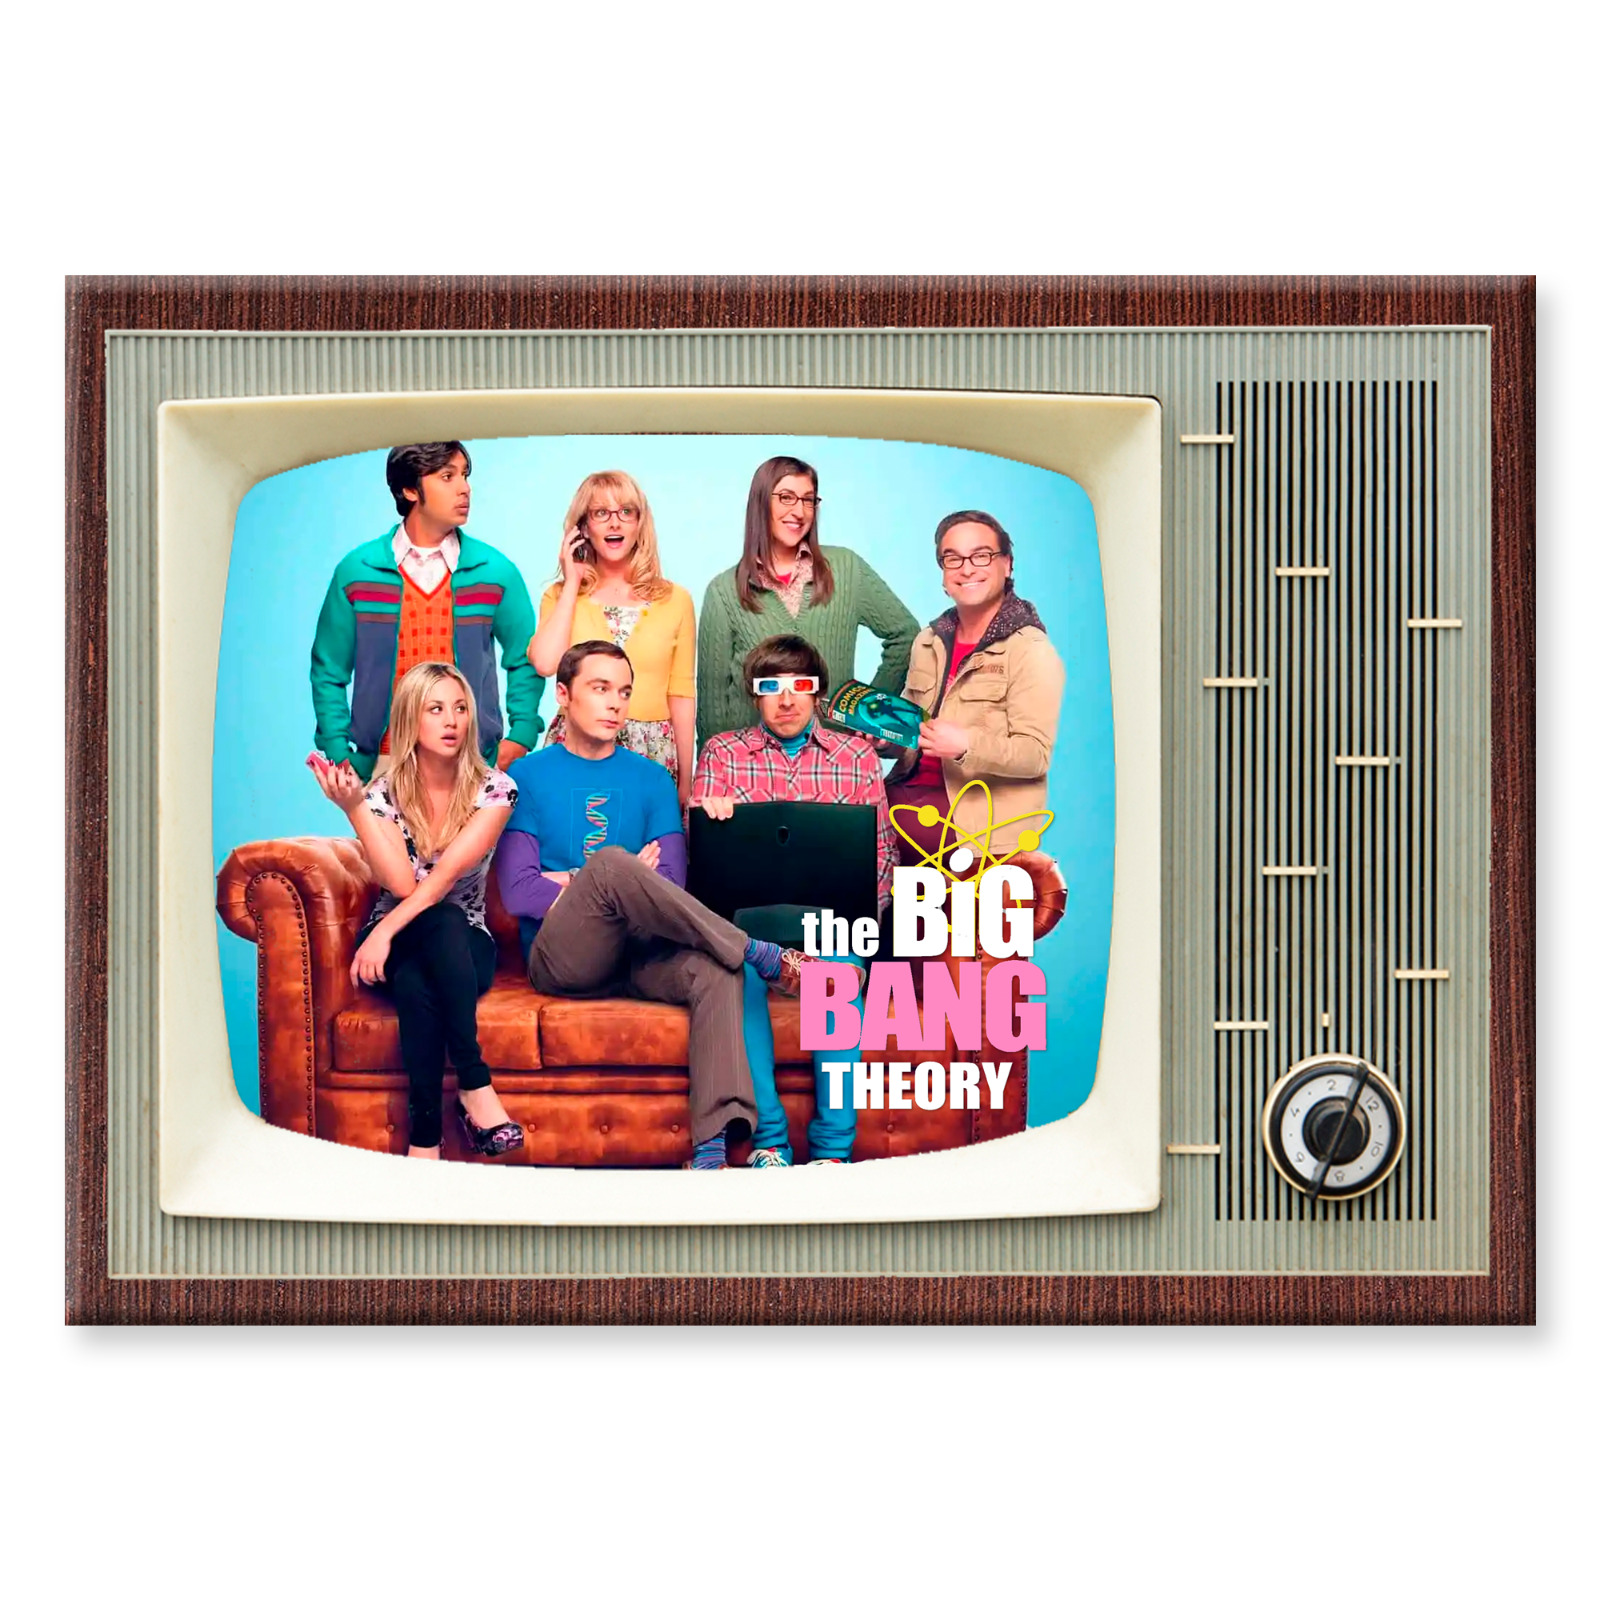 THE BIG BANG THEORY TV Show Retro TV 3.5 inches x 2.5 inches FRIDGE MAGNET